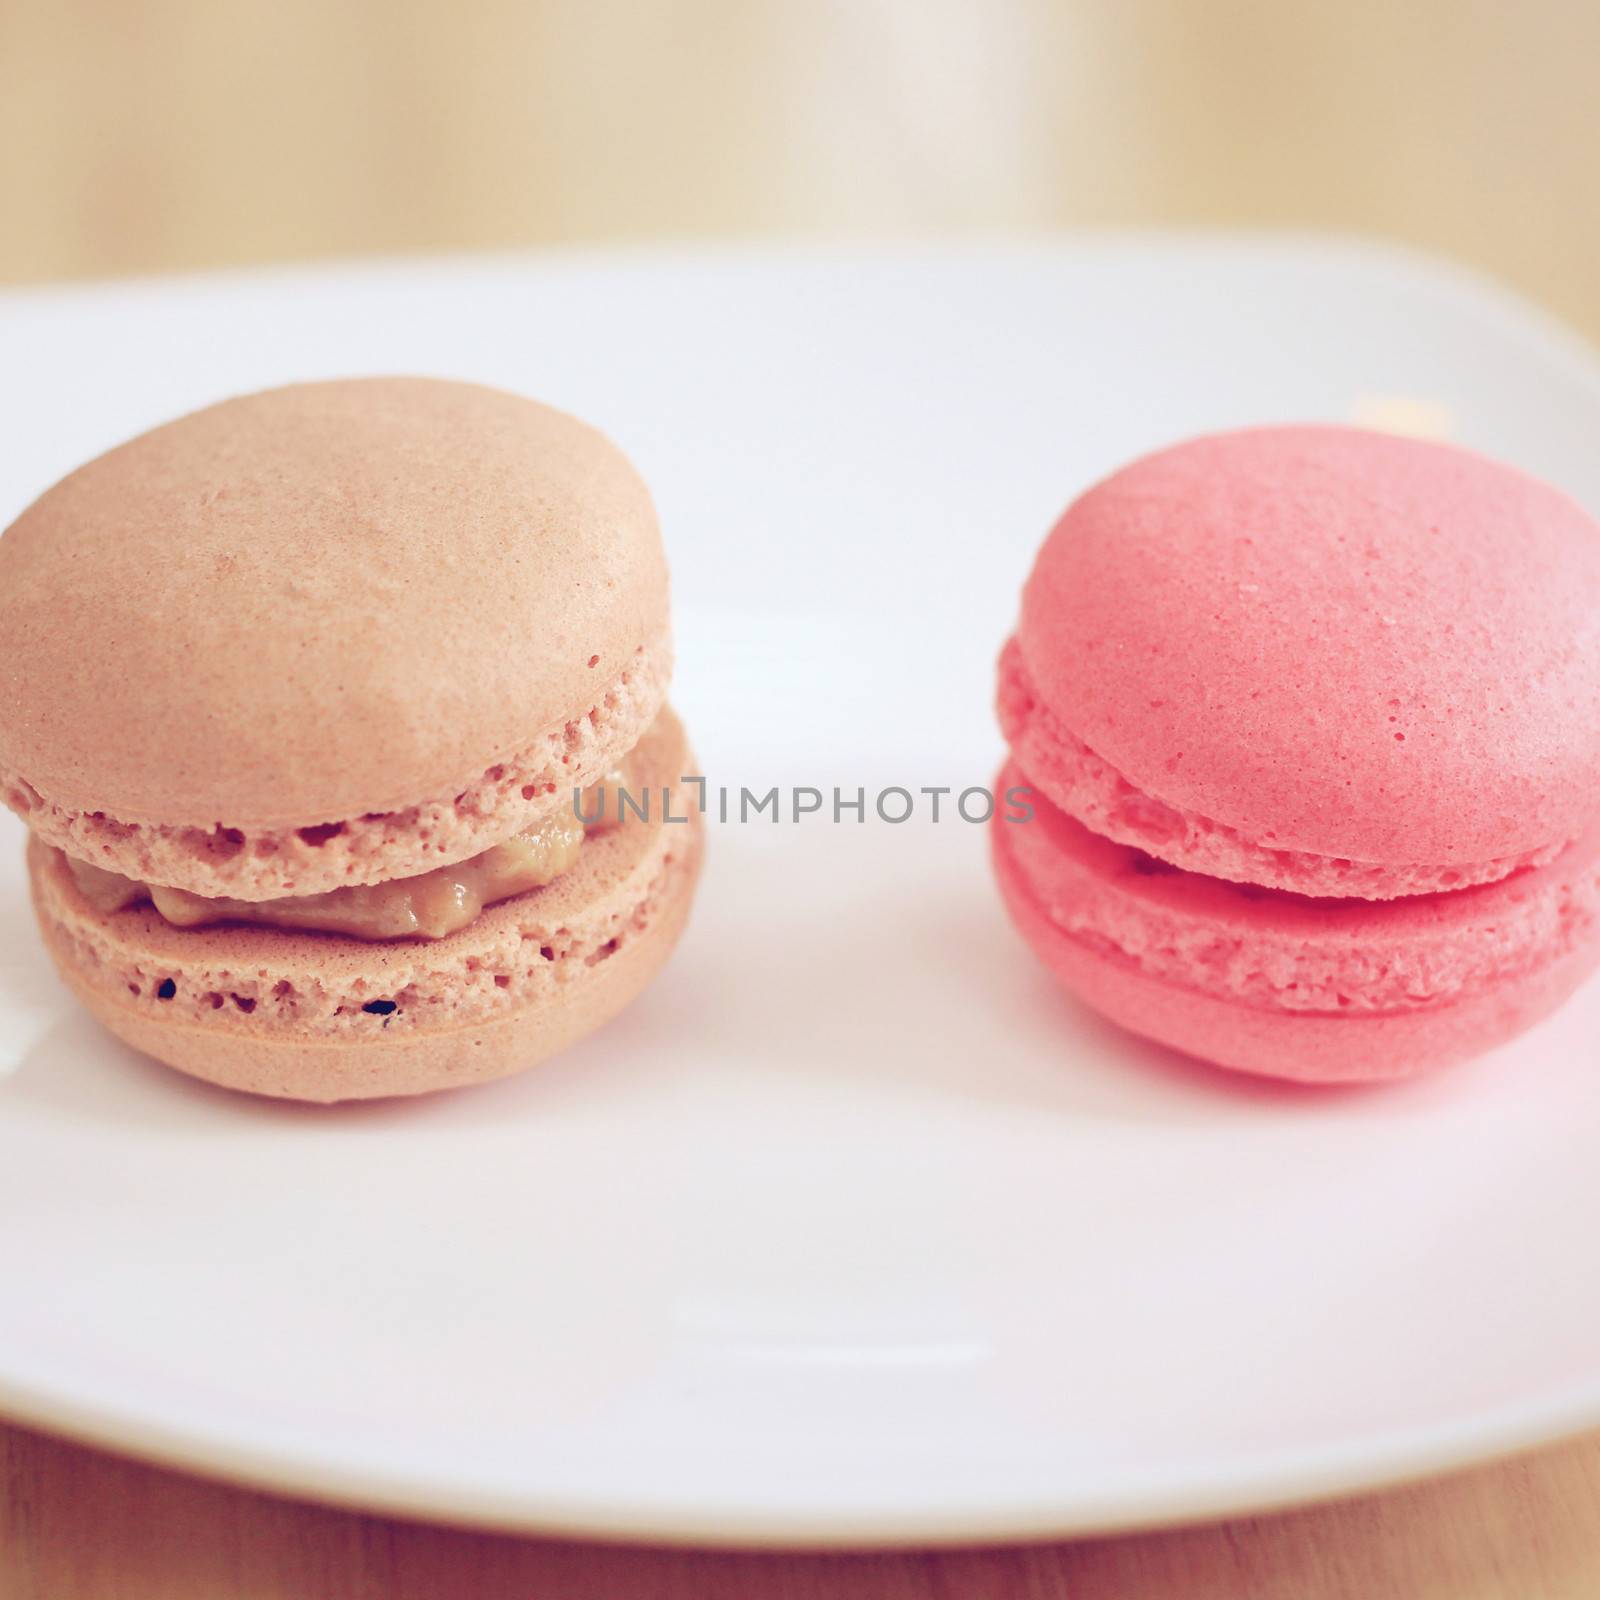 Tasty sweet macaron with retro filter effect